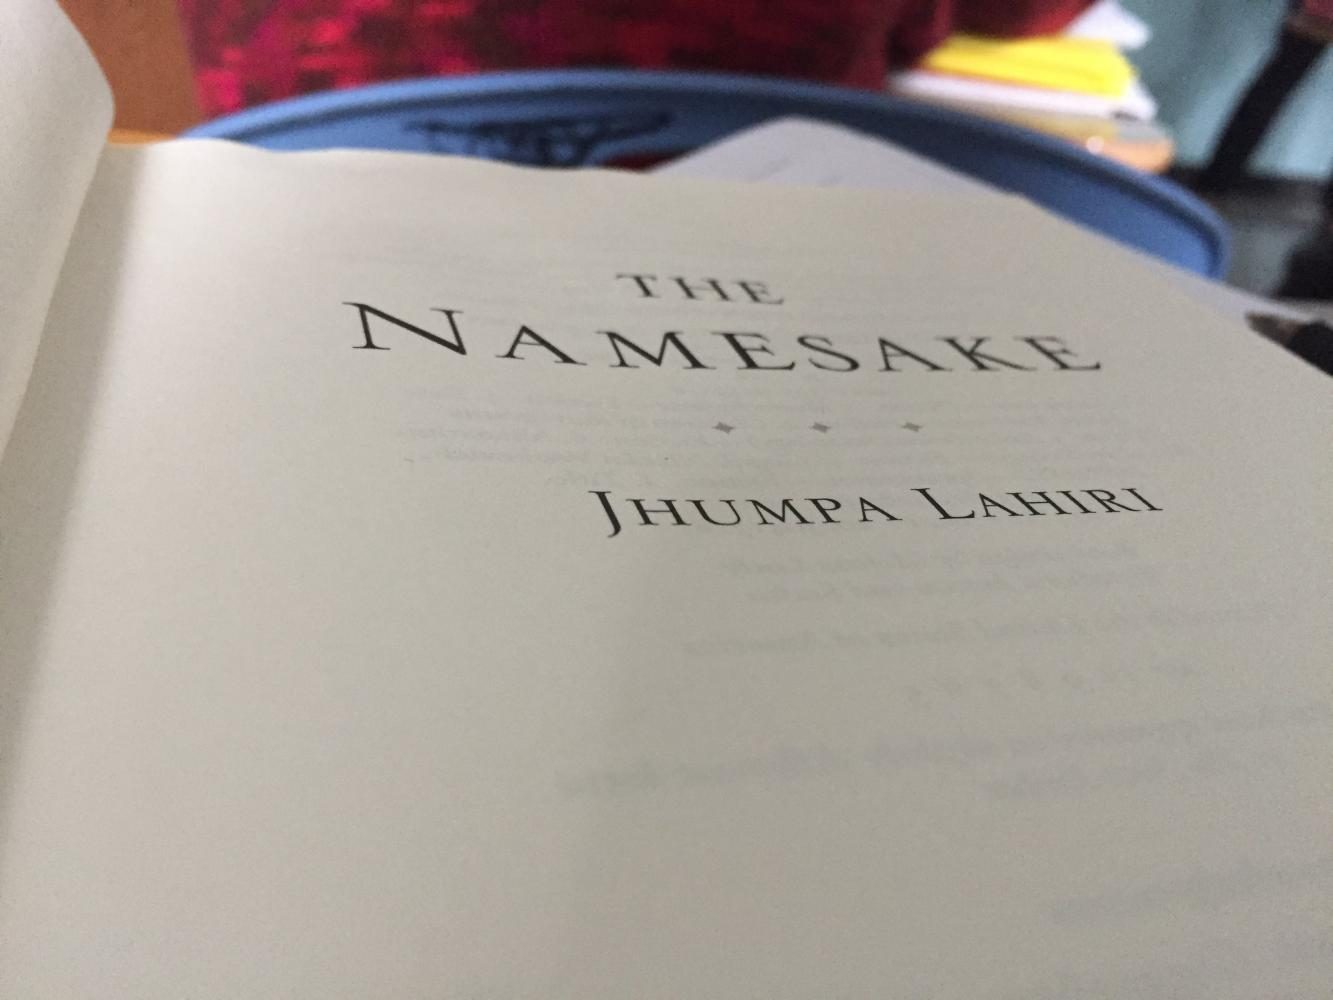 Jhumpa Lahiris The Namesake; the story of a young mans journey to discover his true identity.